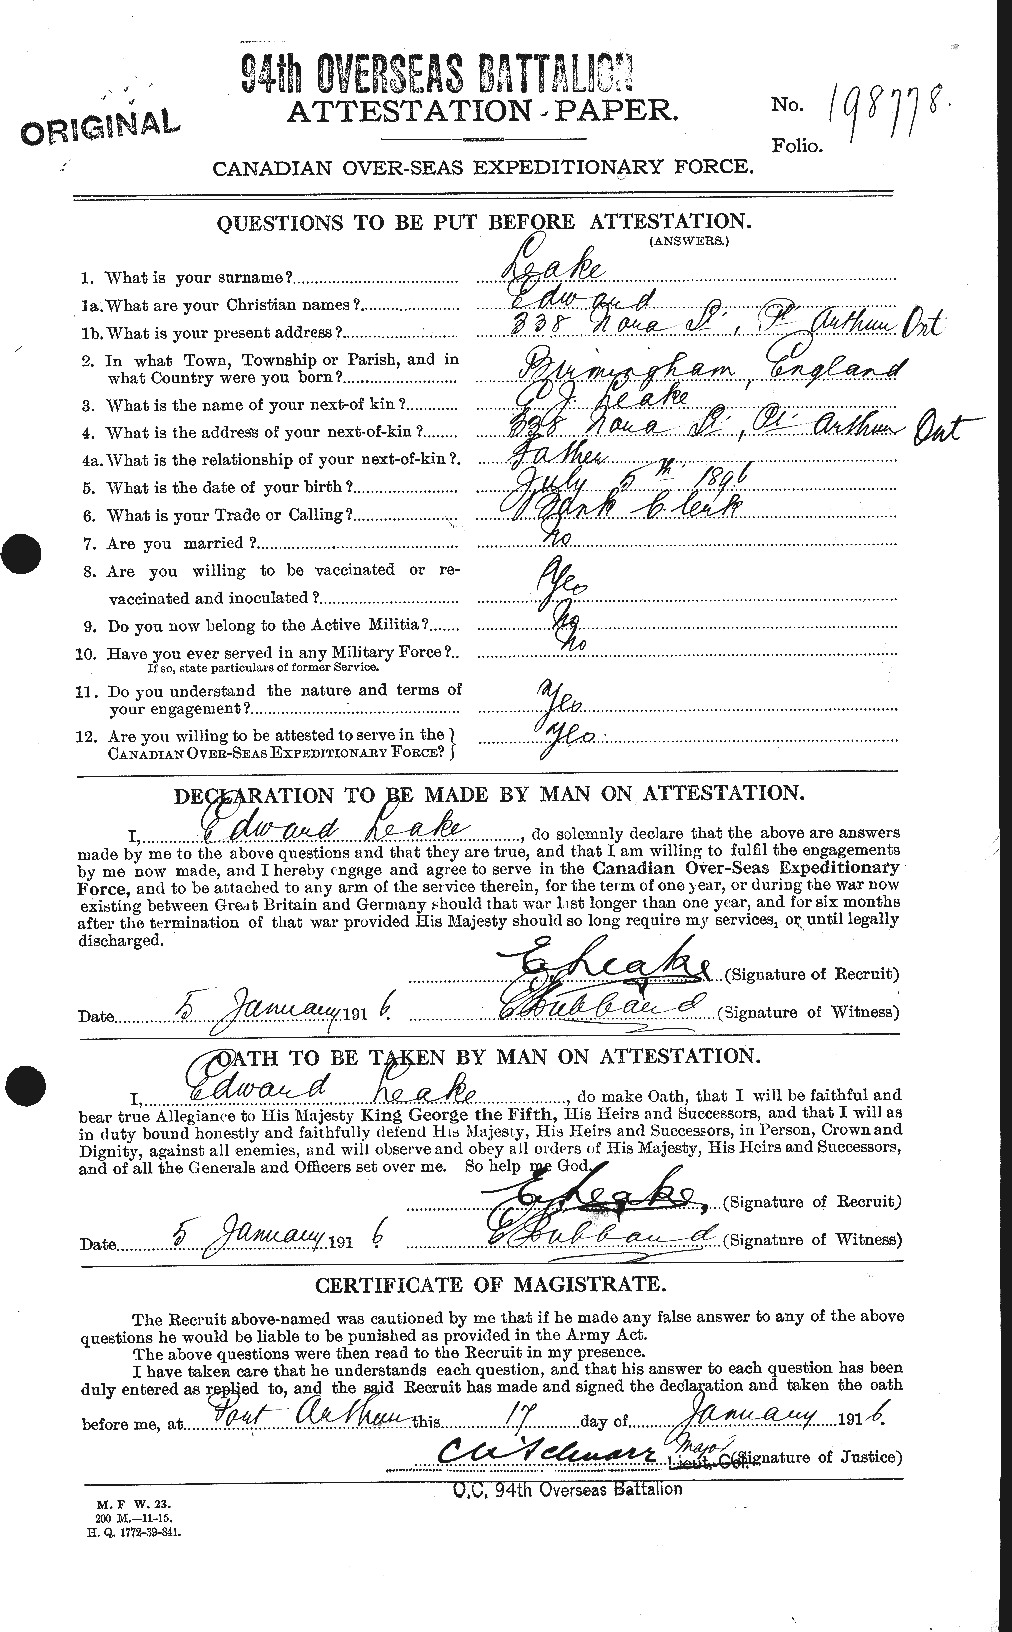 Personnel Records of the First World War - CEF 455977a